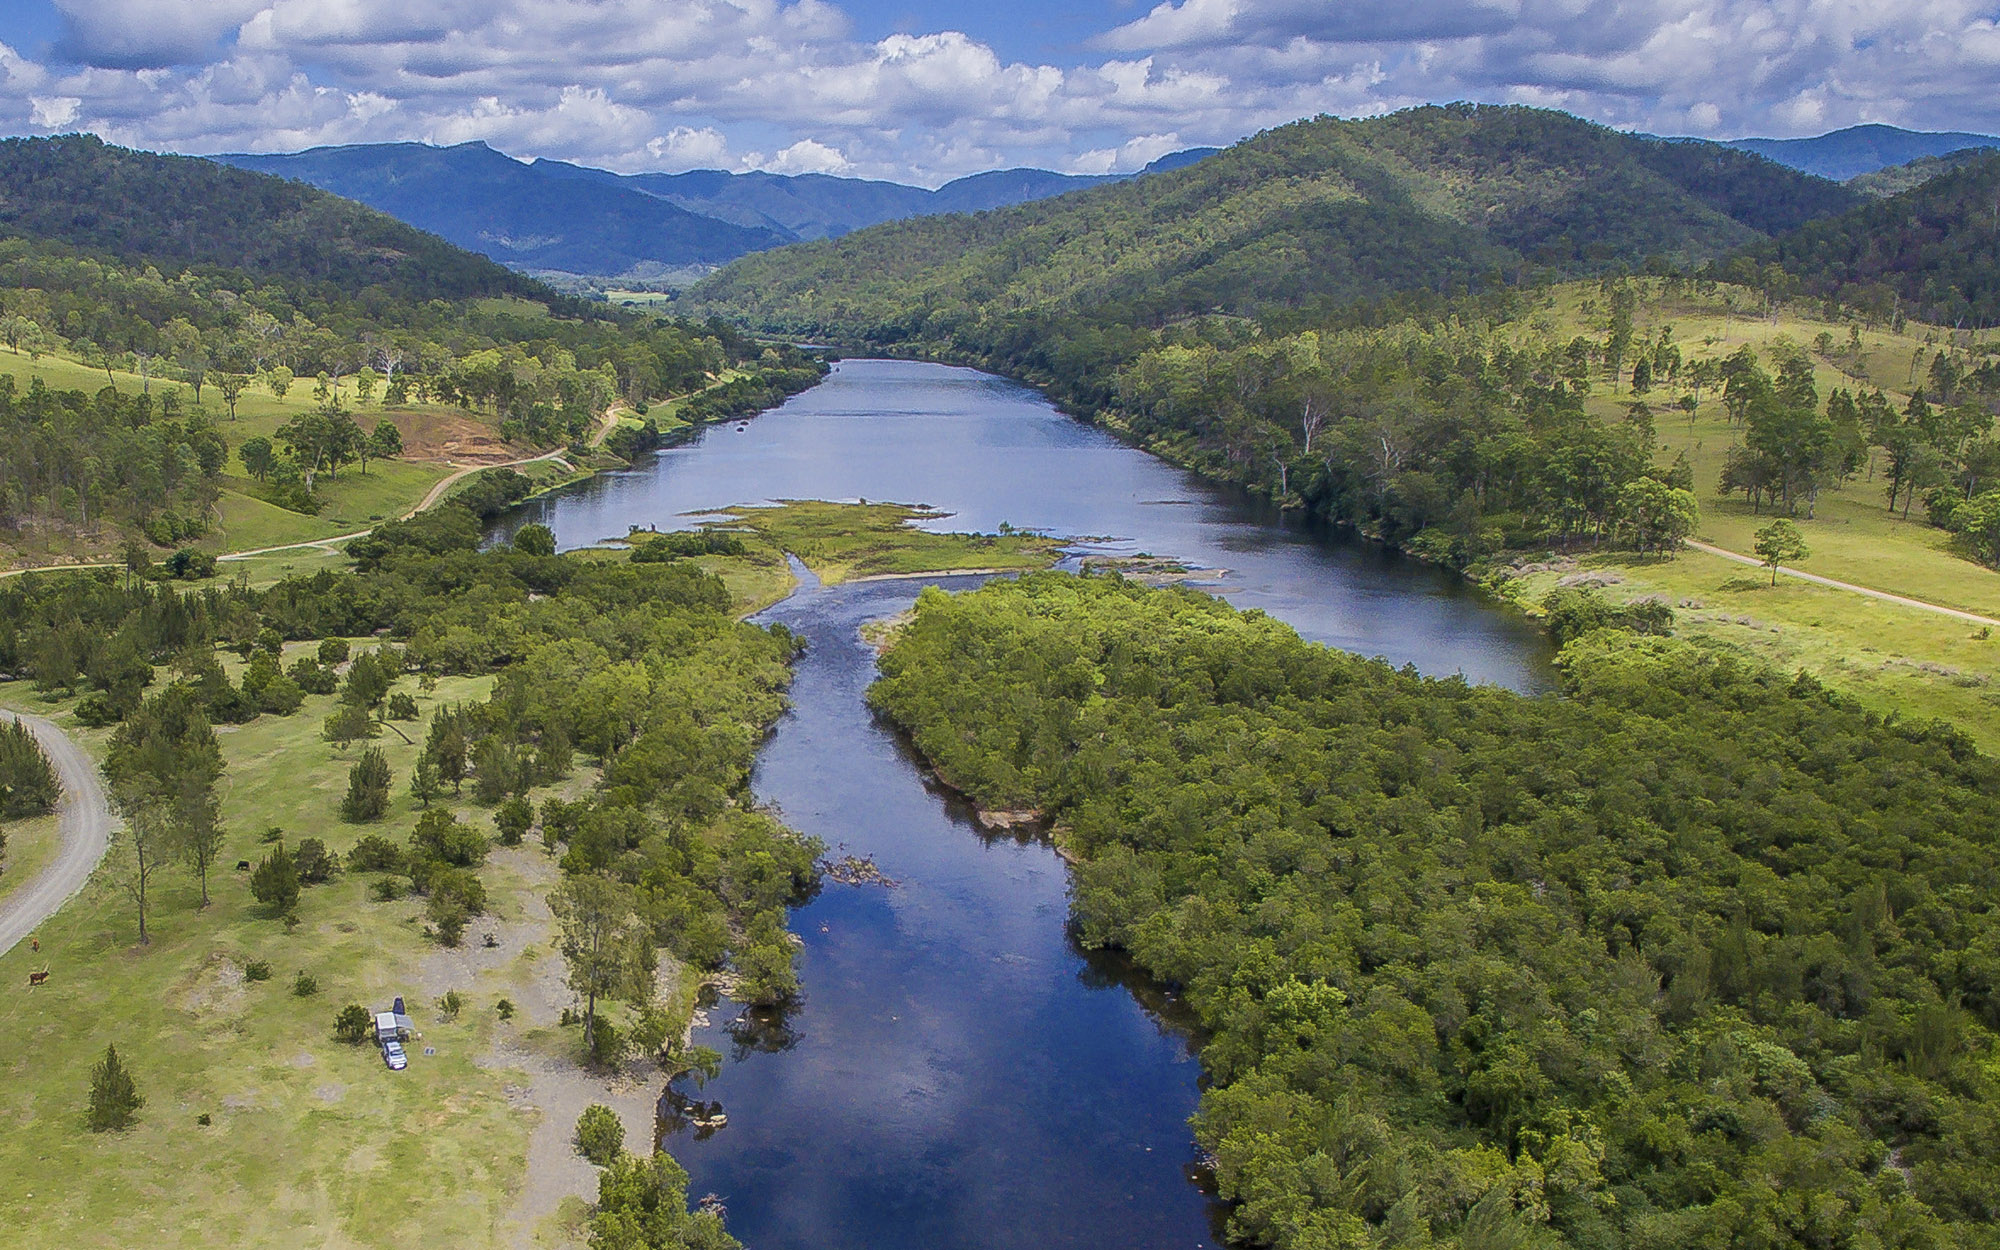 Scenic country views of the Mann River near Cangai, New South Wales.